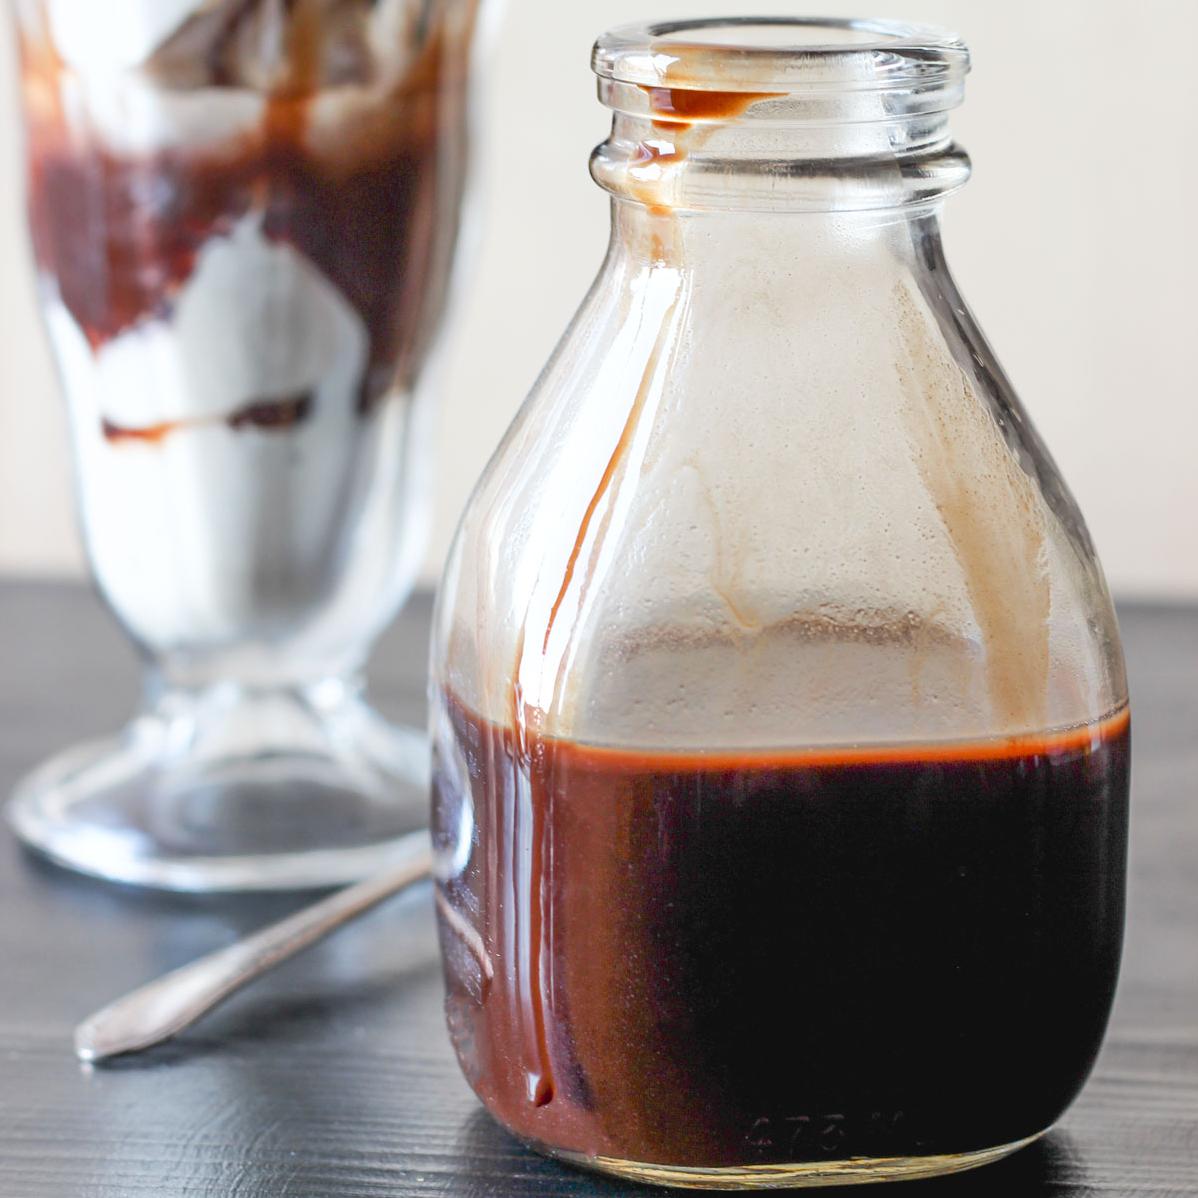  This mocha sauce will make you feel like a professional barista from the comforts of your own home.